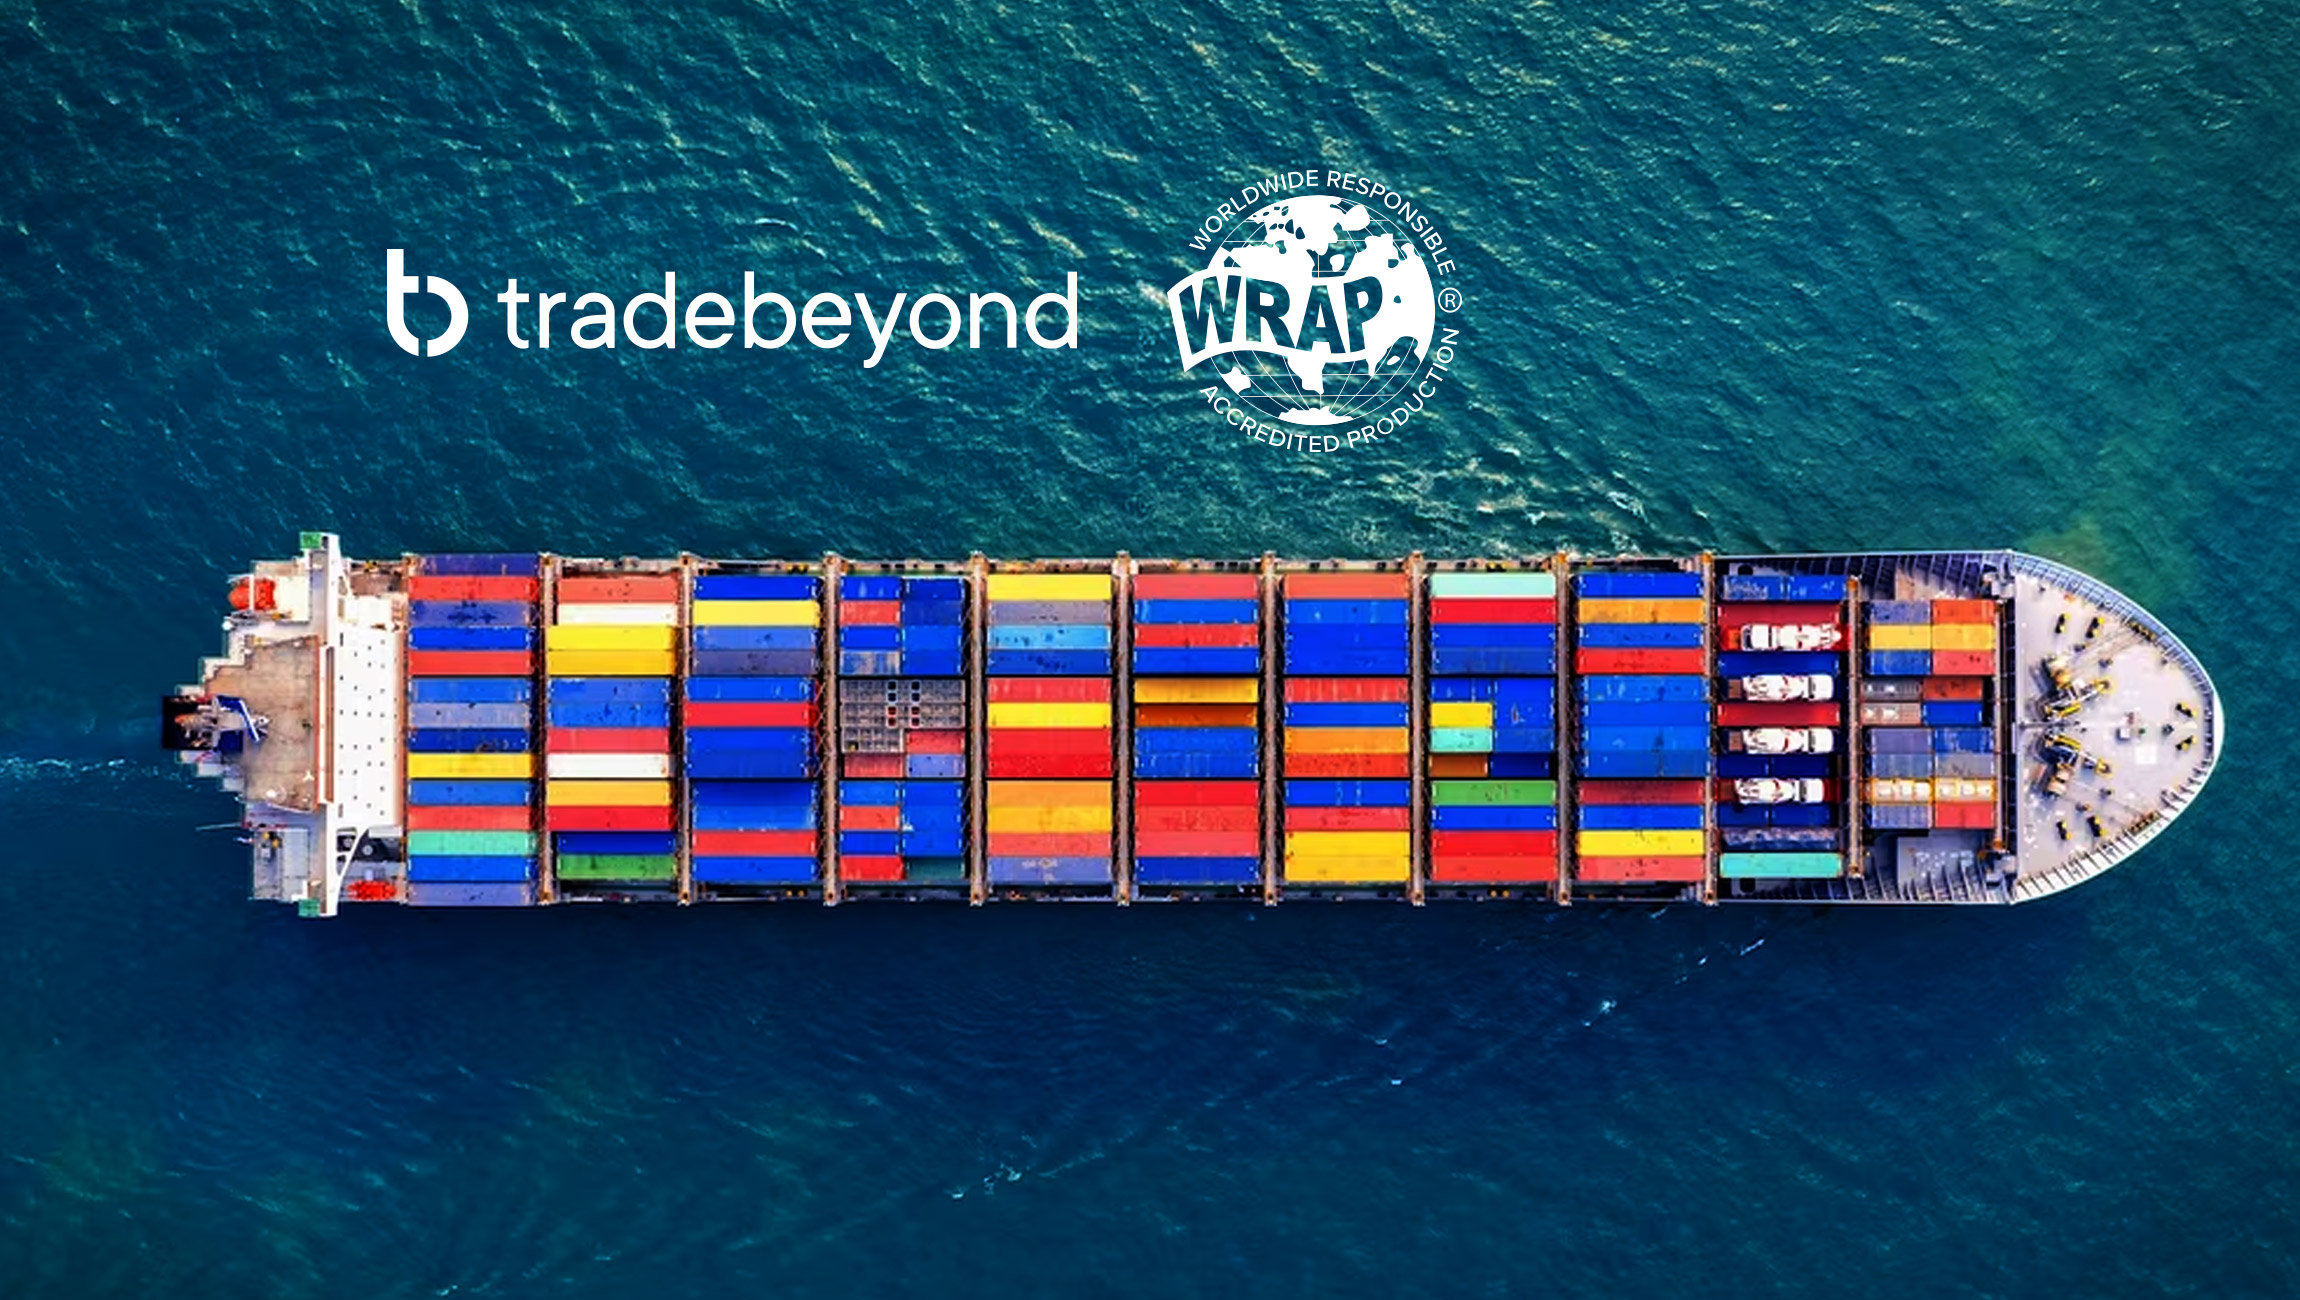 TradeBeyond Underscores Commitment to Supply Chain Responsibility with New WRAP Integration